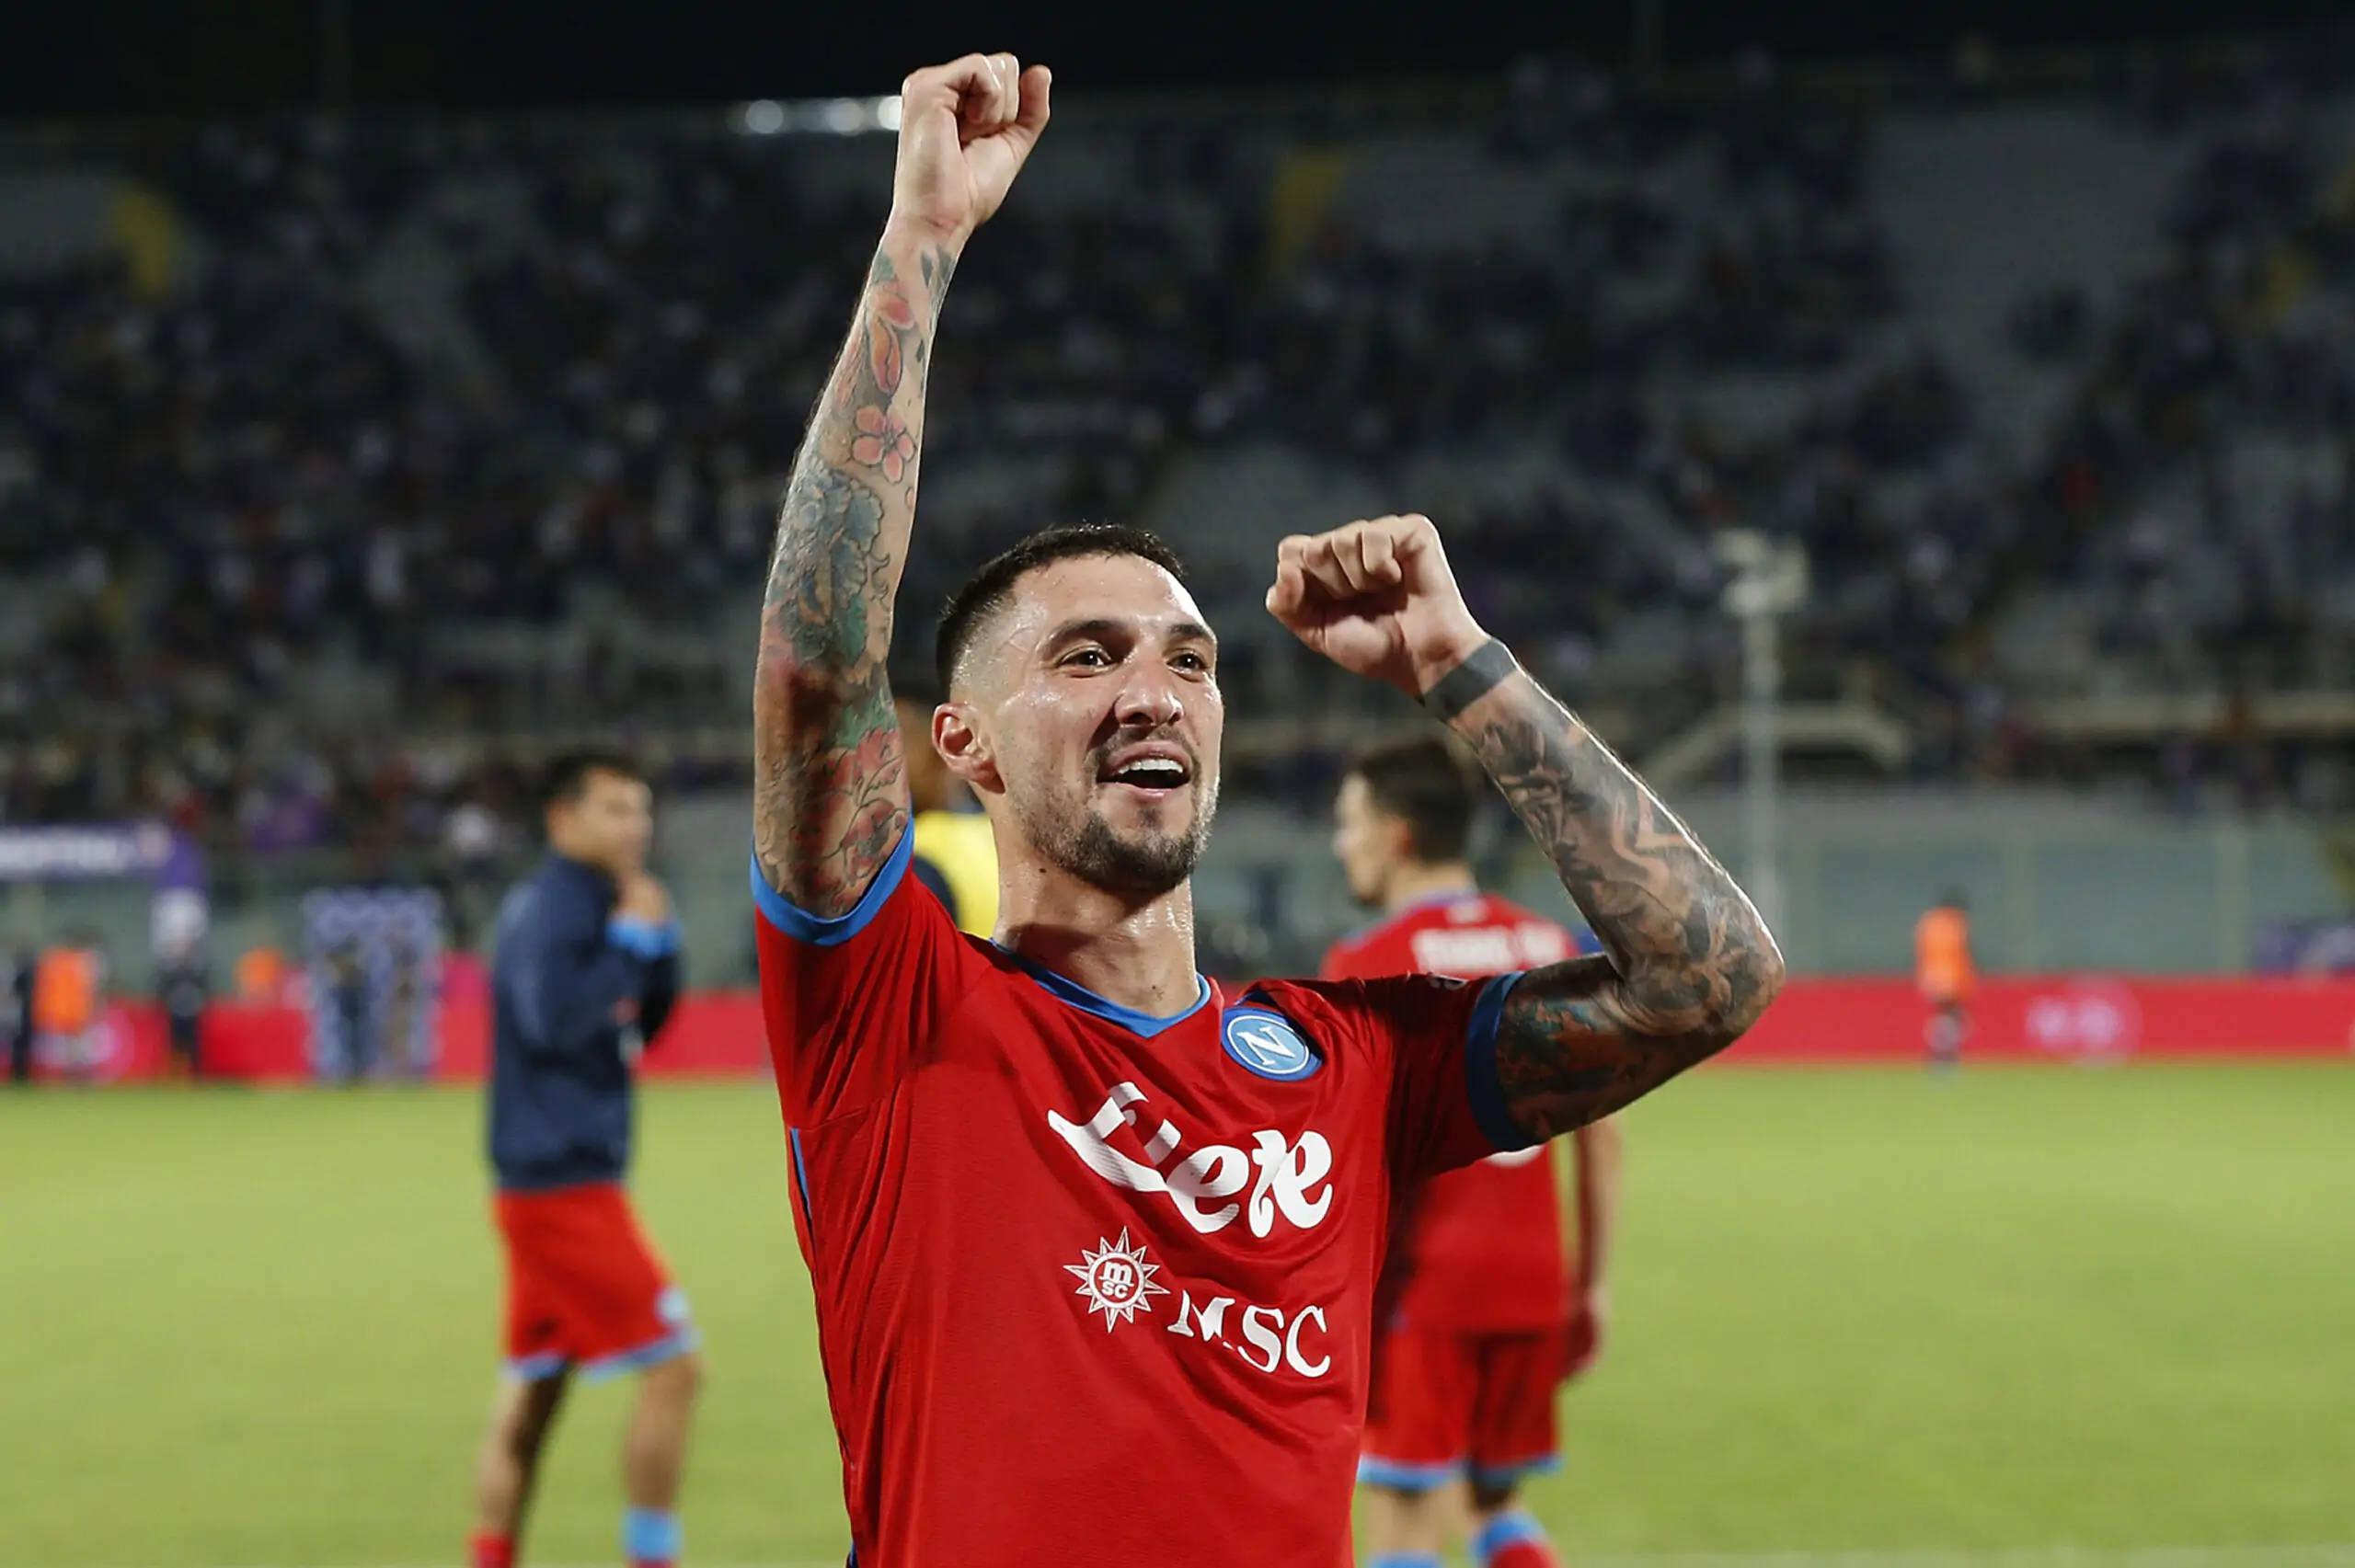 Italian agent Mario Giuffredi, who represents Di Lorenzo and Politano, has backed the latter to sign with Napoli for life, following the former's footsteps.